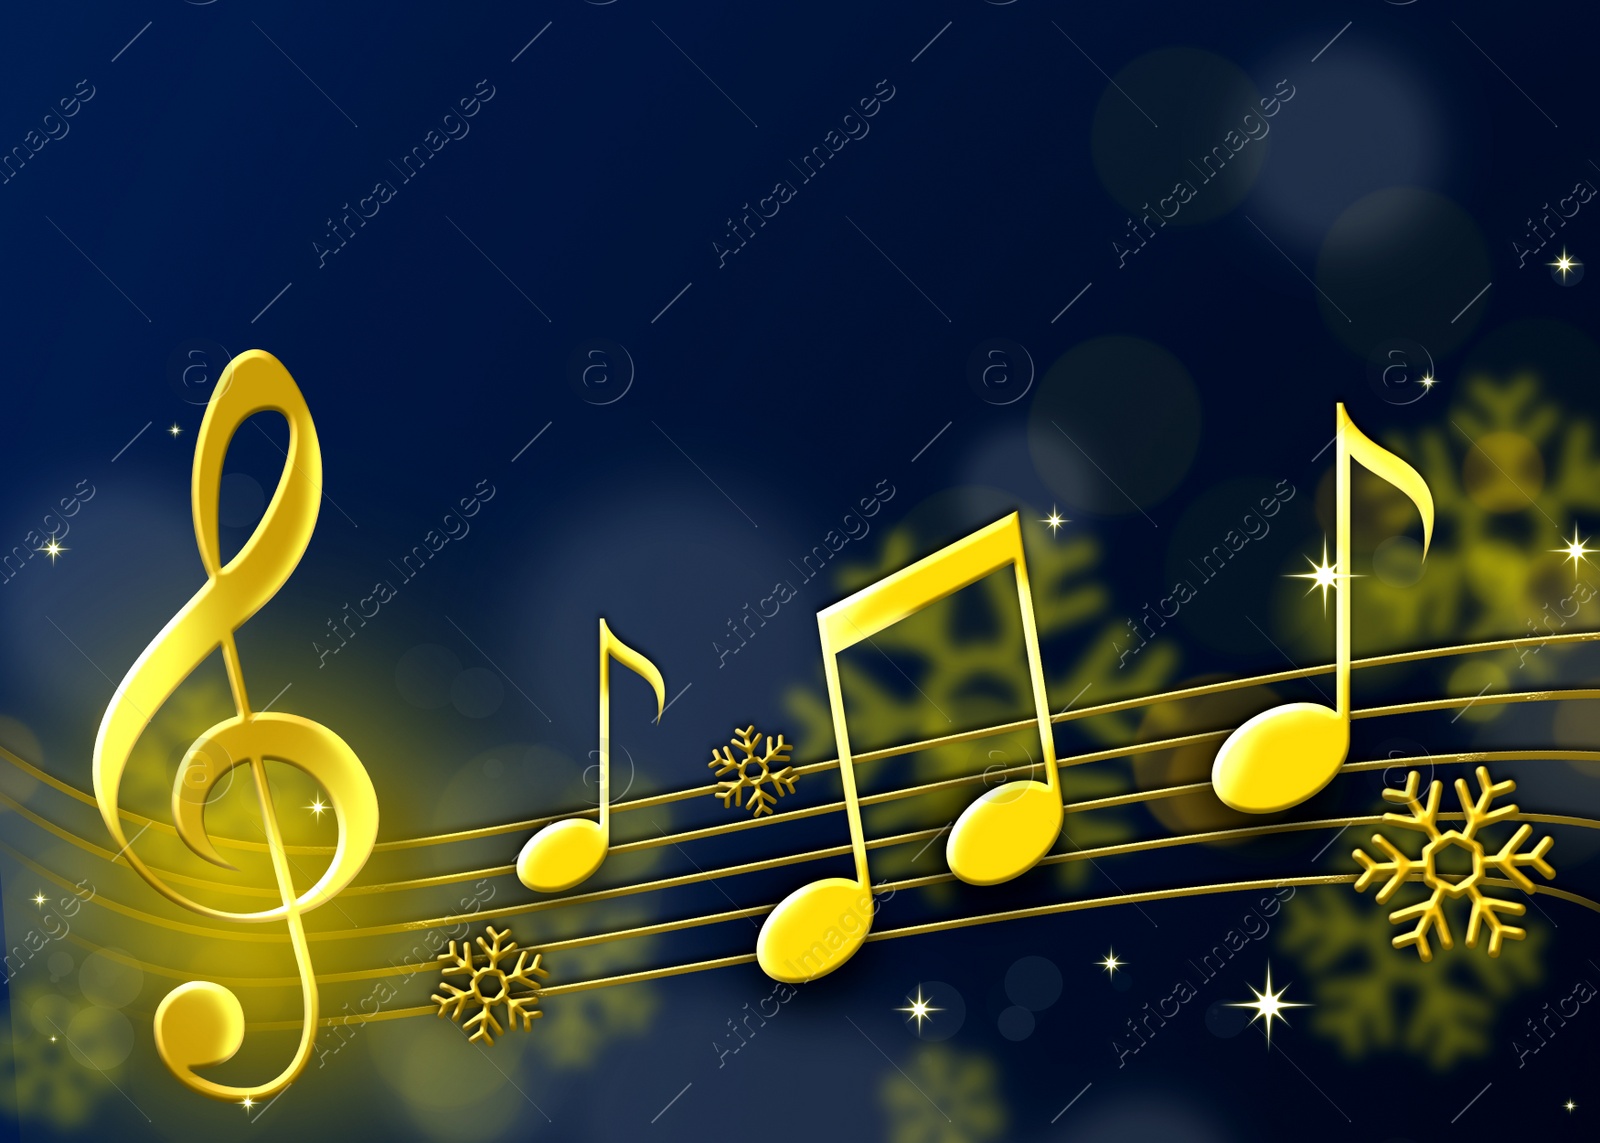 Illustration of Christmas melody. Music notes and snowflakes on blue background, space for text. Illustration design